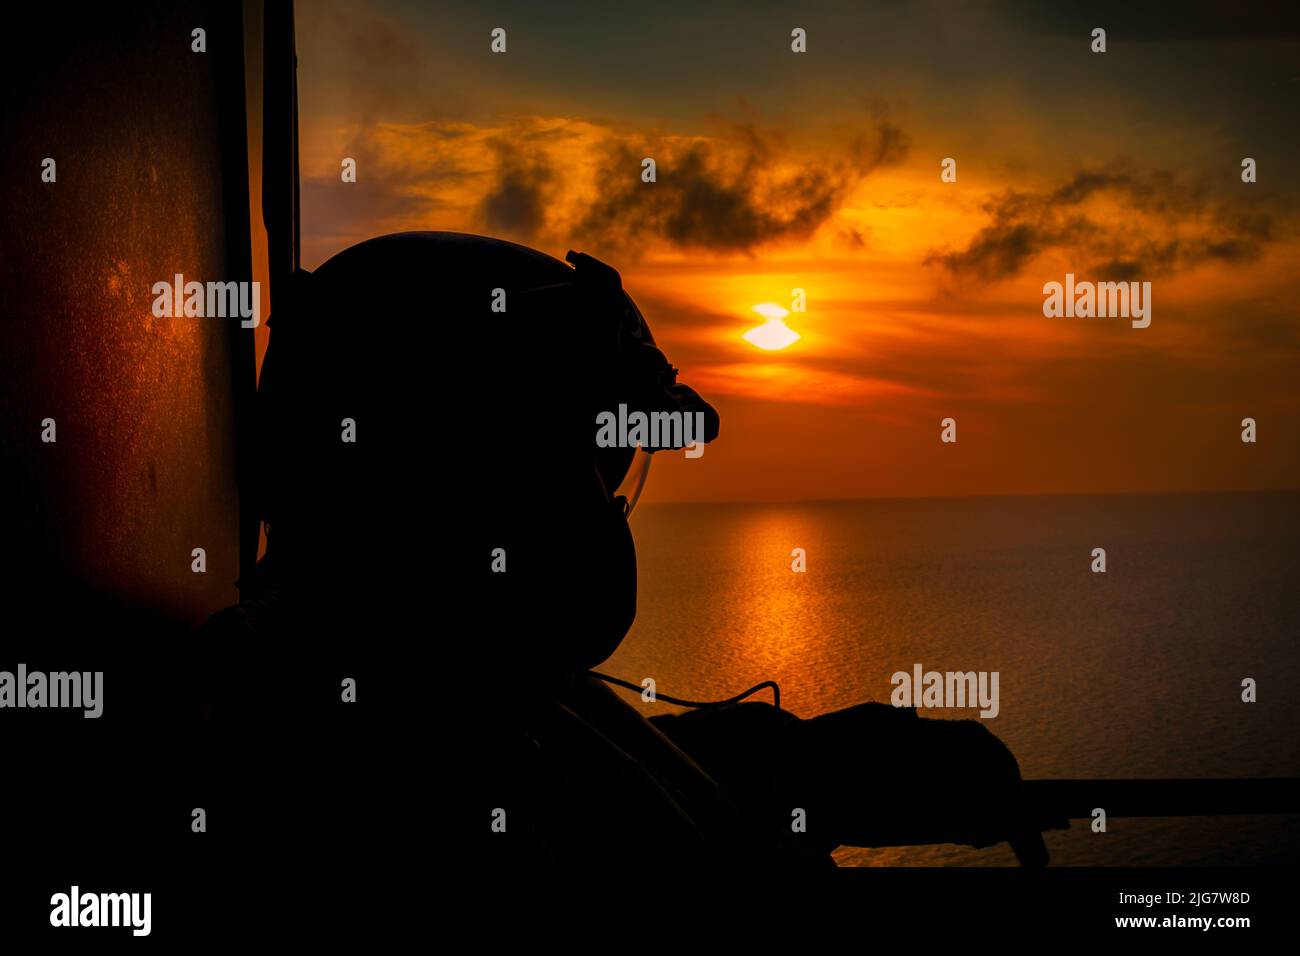 The silhouette of flight engineer of helicopter flying at sunset in the Bahamas Stock Photo